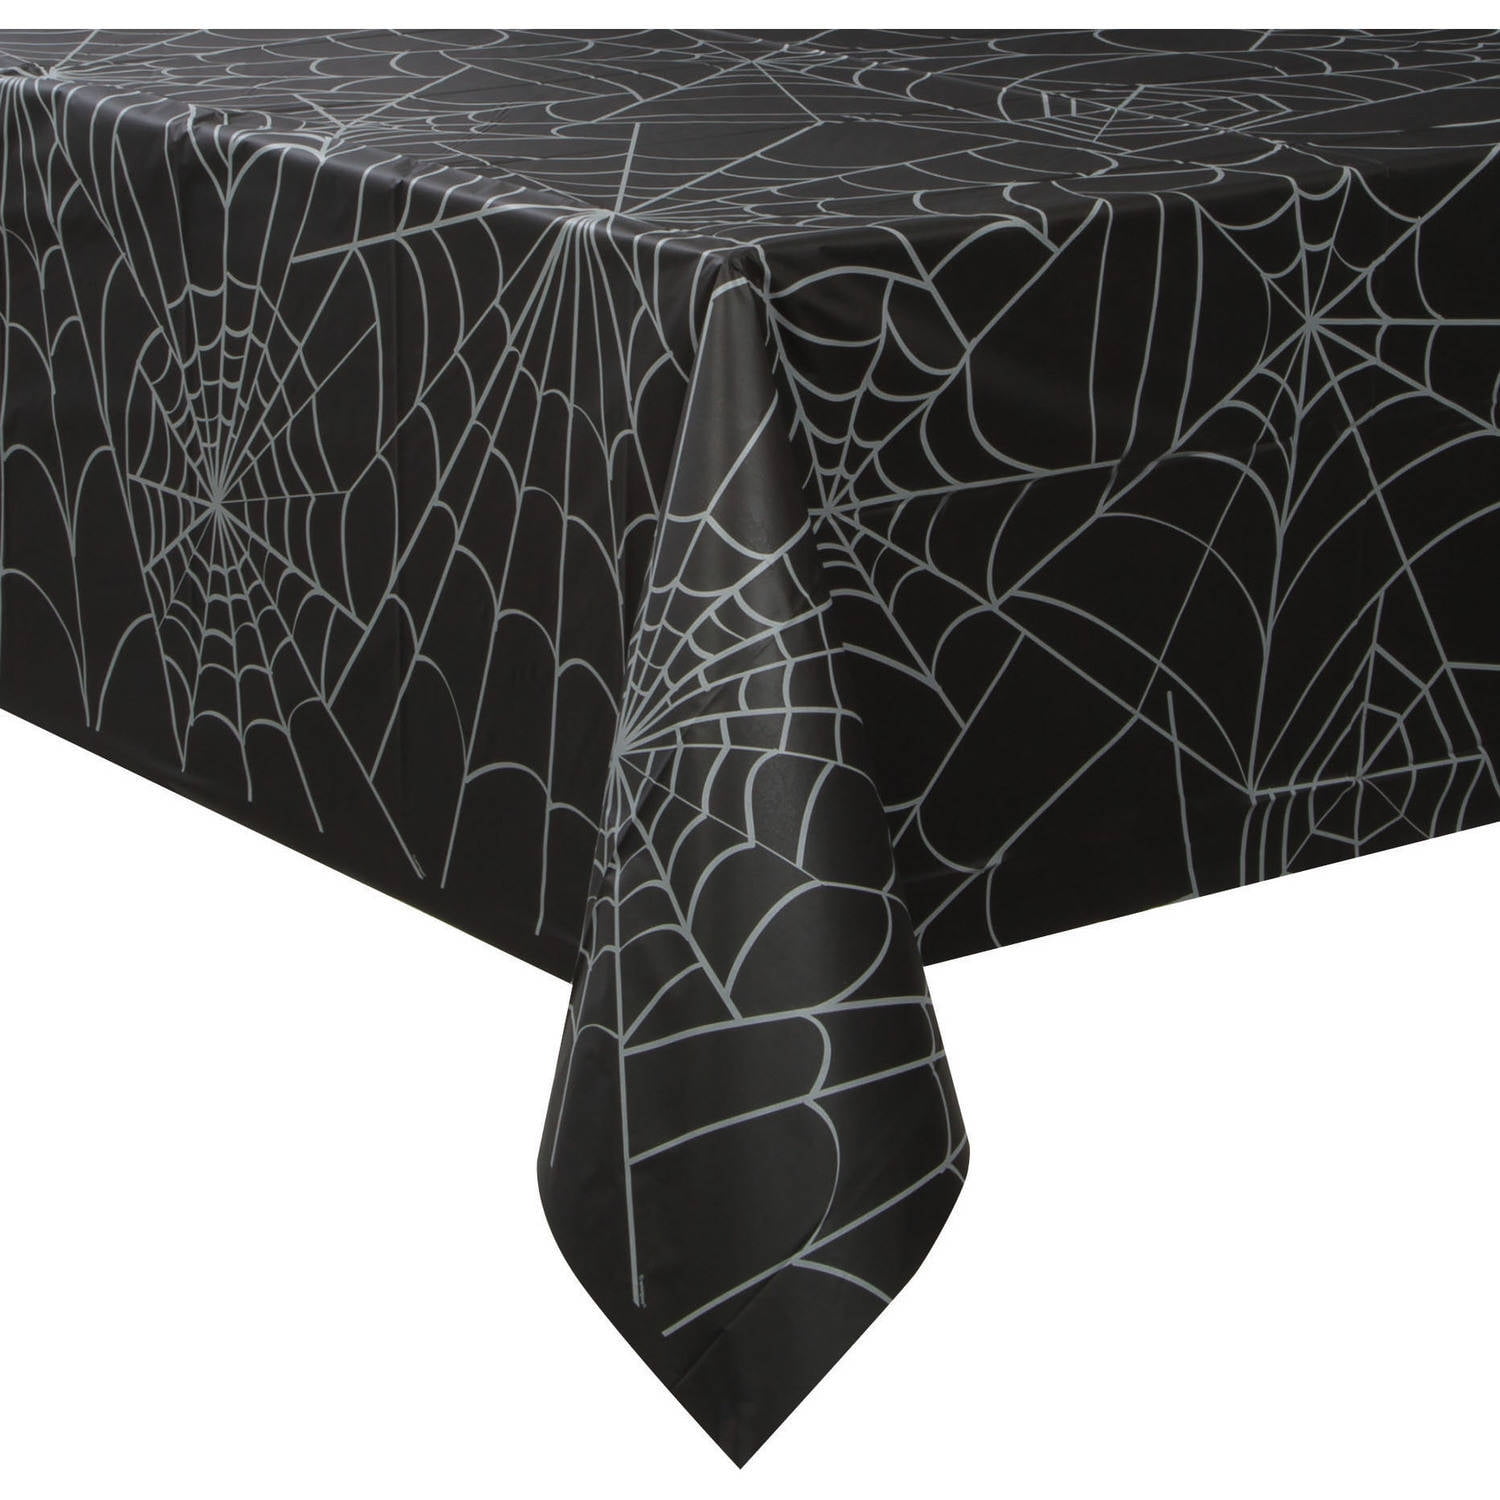 For Halloween 2019 Details about   Halloween Lace Bat Spider Pattern Table Cloth 